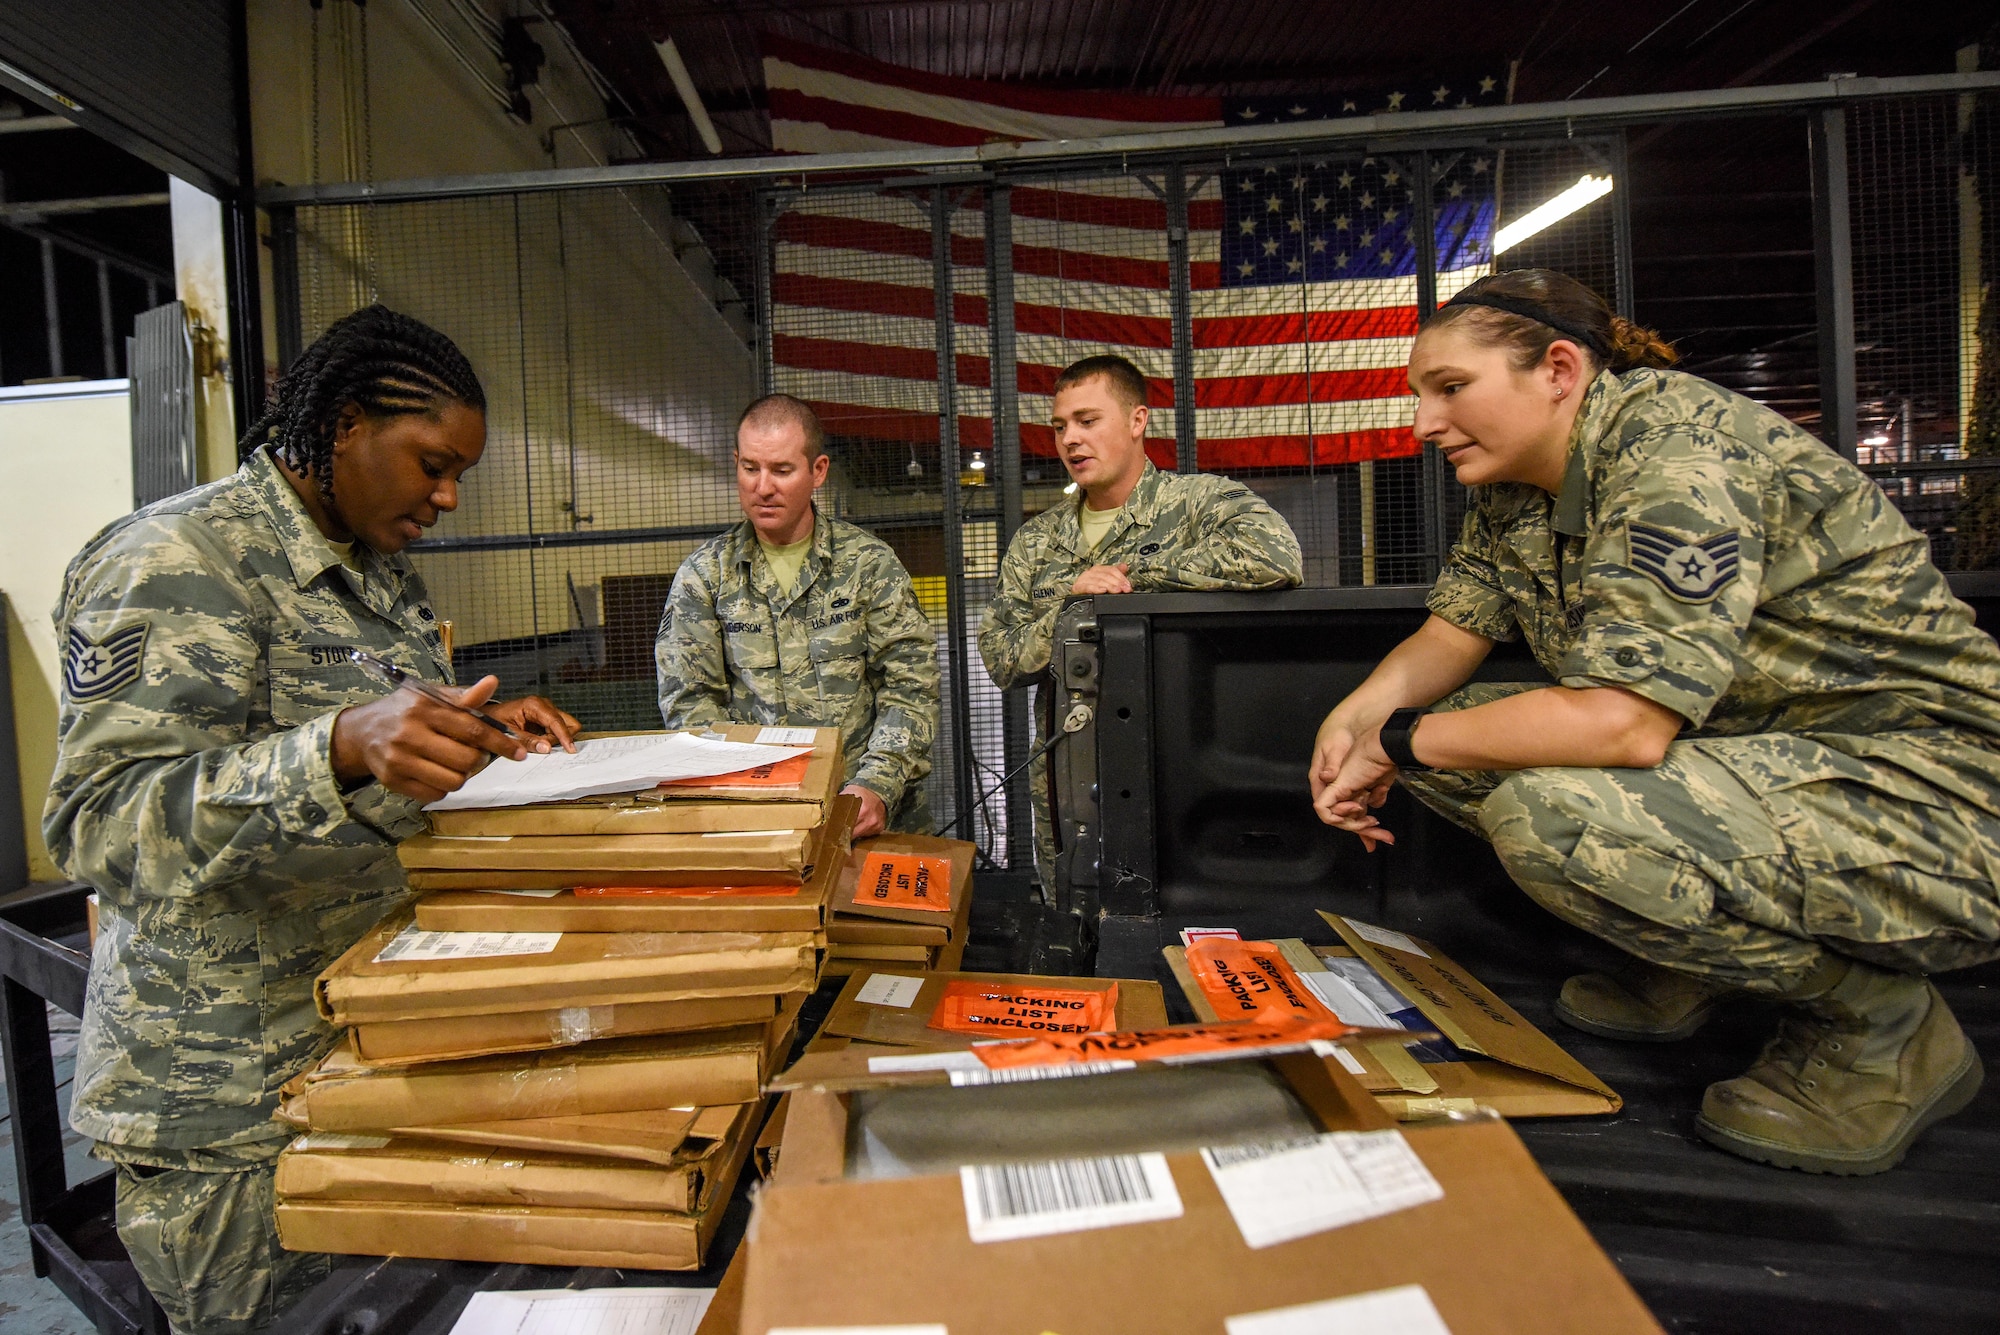 Tech. Sgt. Jewel Stott (left), 4th LRS NCO in-charge of Centralized Repair Facility, reviews a list of maintenance parts delivered by Airmen from the 4th Component Maintenance Squadron, Aug. 3, 2016, at Seymour Johnson Air Force Base, North Carolina. Airmen from the 4th CMS back shop pick-up, fix, and redeliver maintenance parts in need of repair that are then stored at the CRF and entered into a database for other bases to access, search and order parts. (U.S. Air Force photo by Airman Shawna L. Keyes)